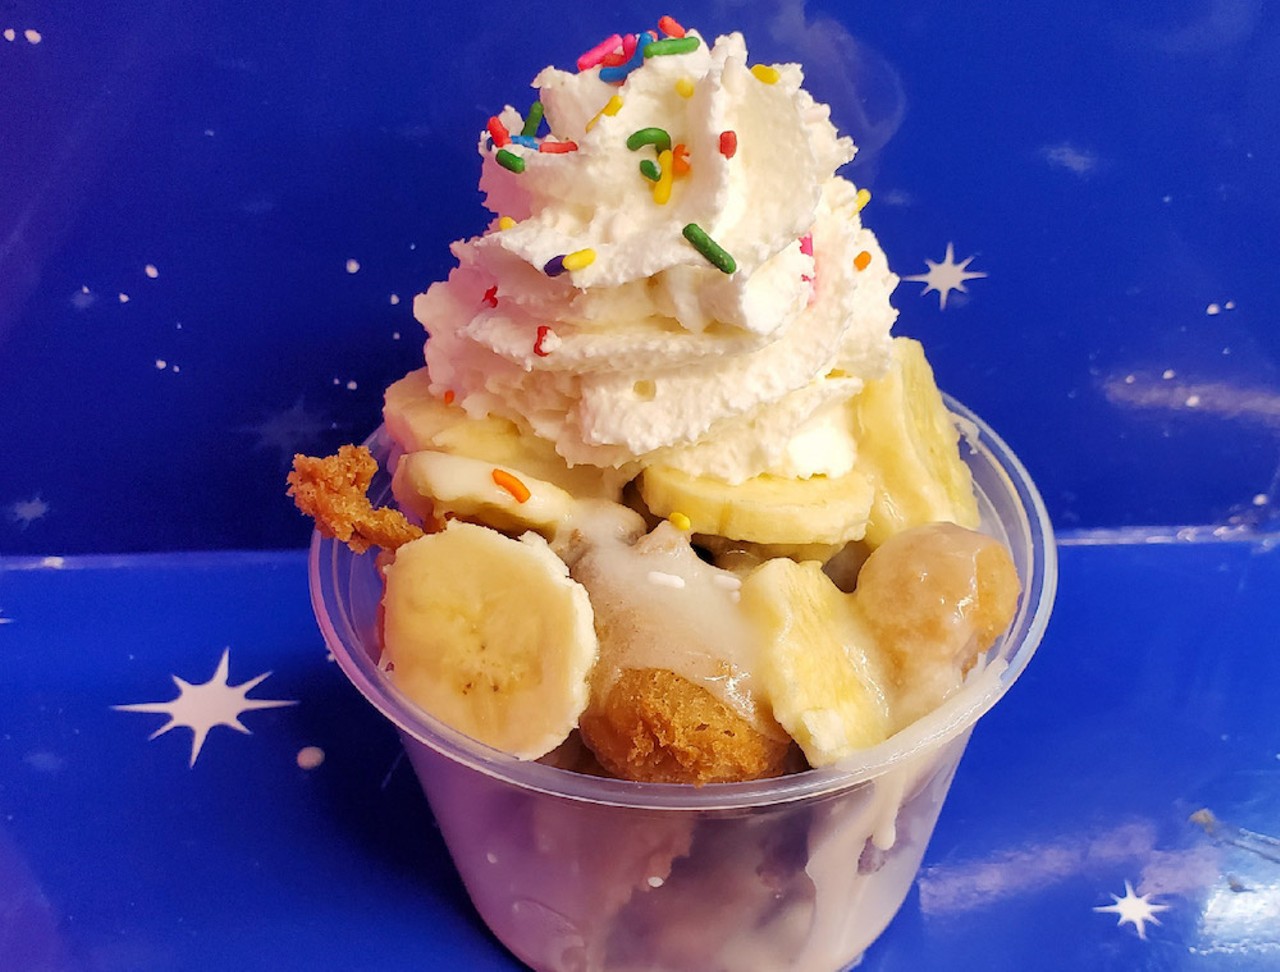 Deep-Fried Banana Pudding             
"Donut holes topped with Banana Pudding and whip cream & Caramel Drizzle on top."         
Where to find it: DeAnna's Steak Sundaes